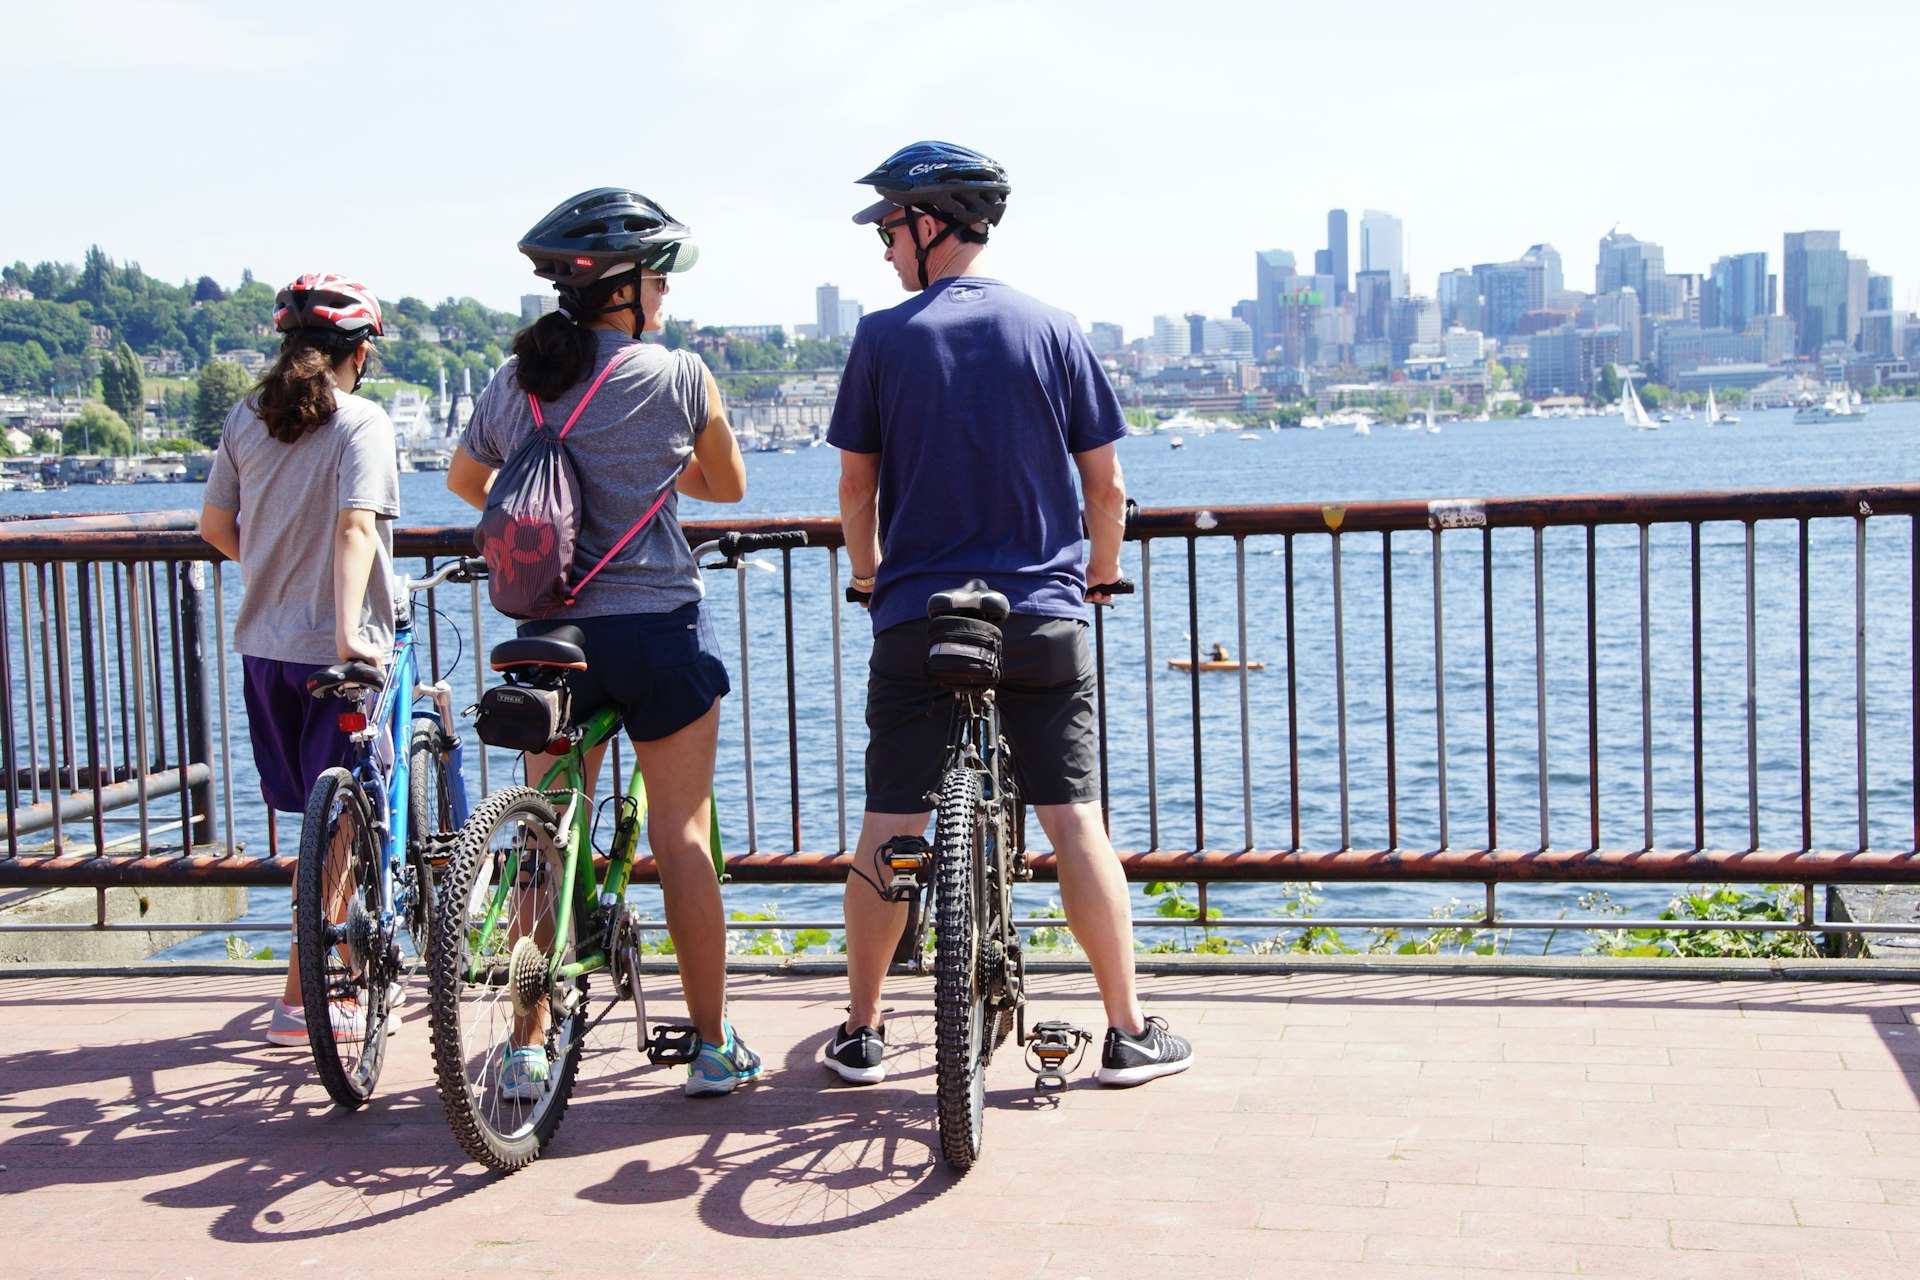 Cyclists take a rest stop in Gas Works Park, Seattle